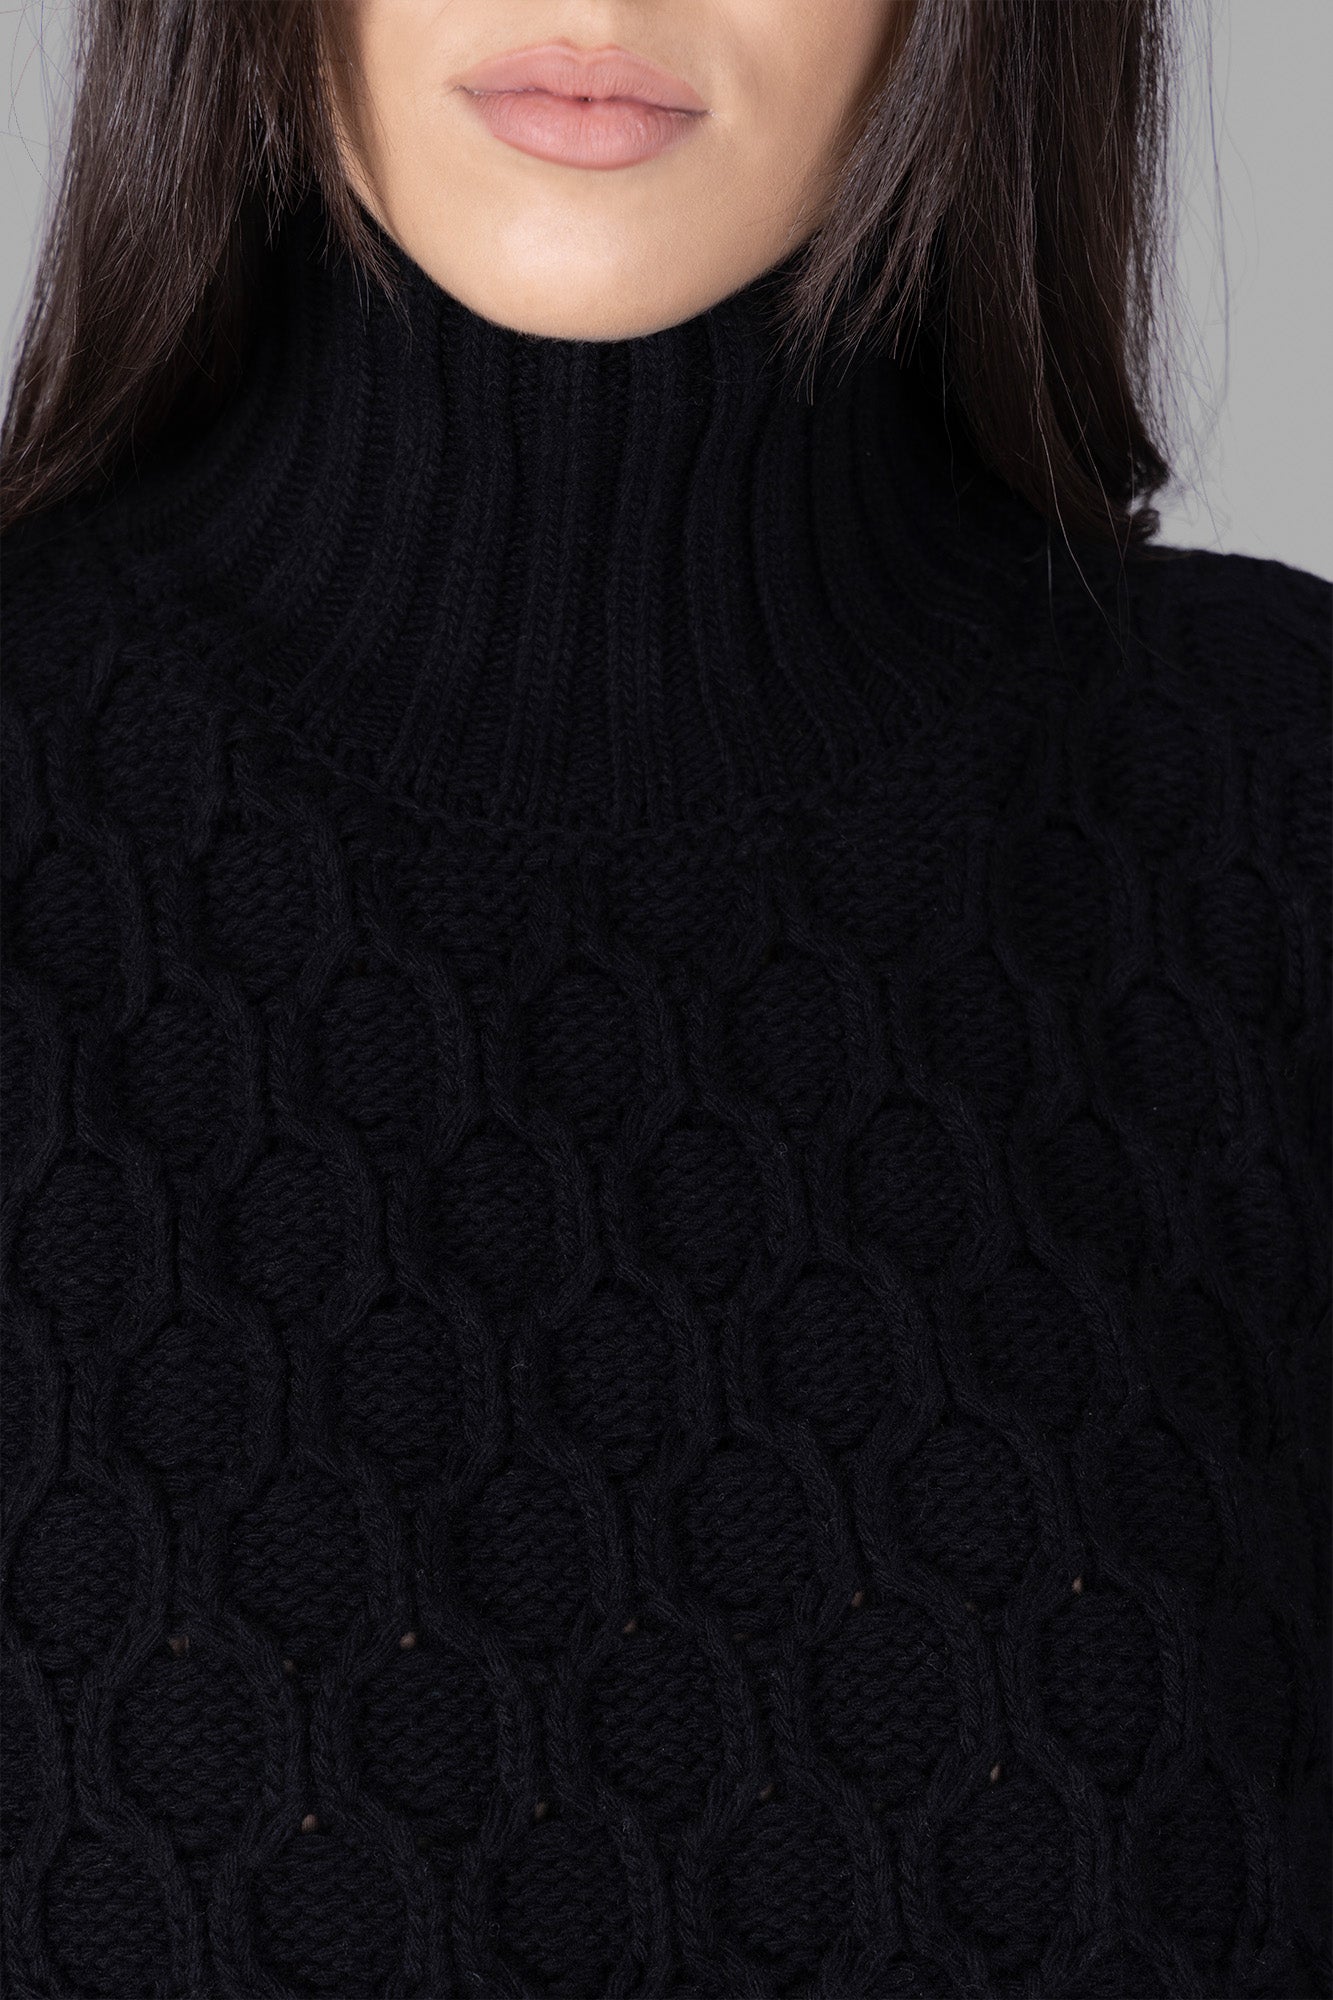 Black Cable Knit Sweater